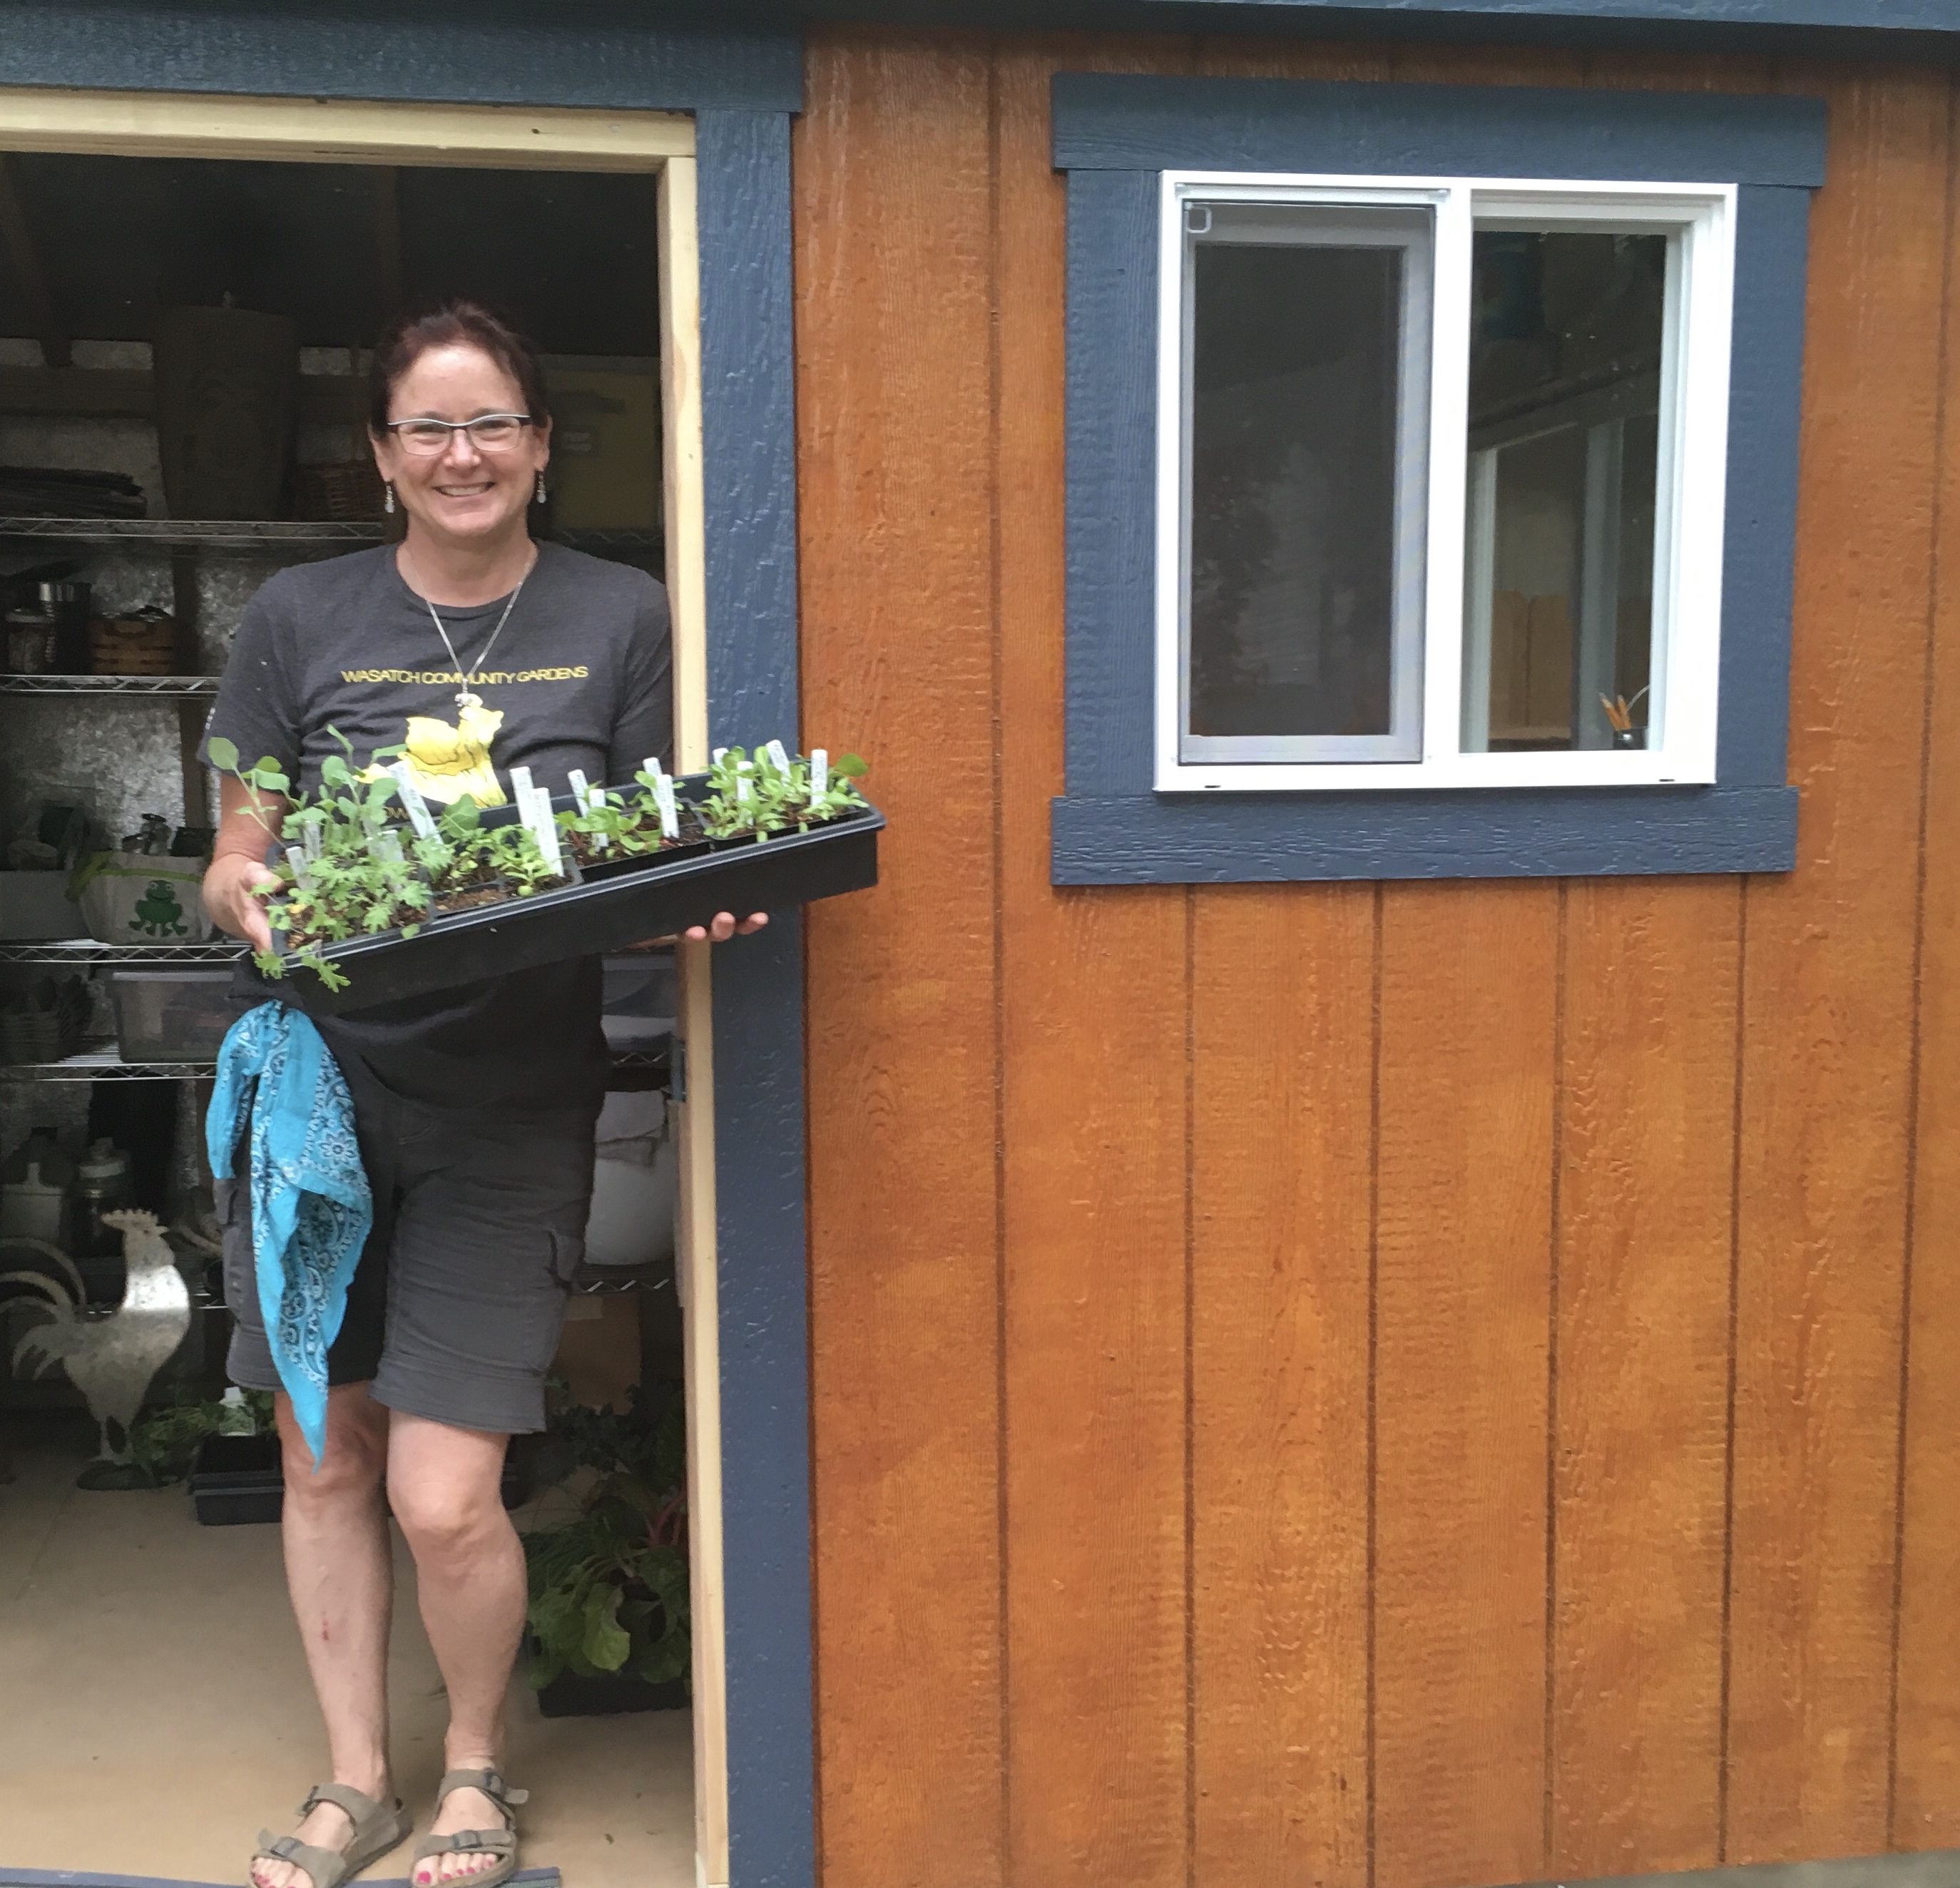 Mb with flat of seedlings by orange shed